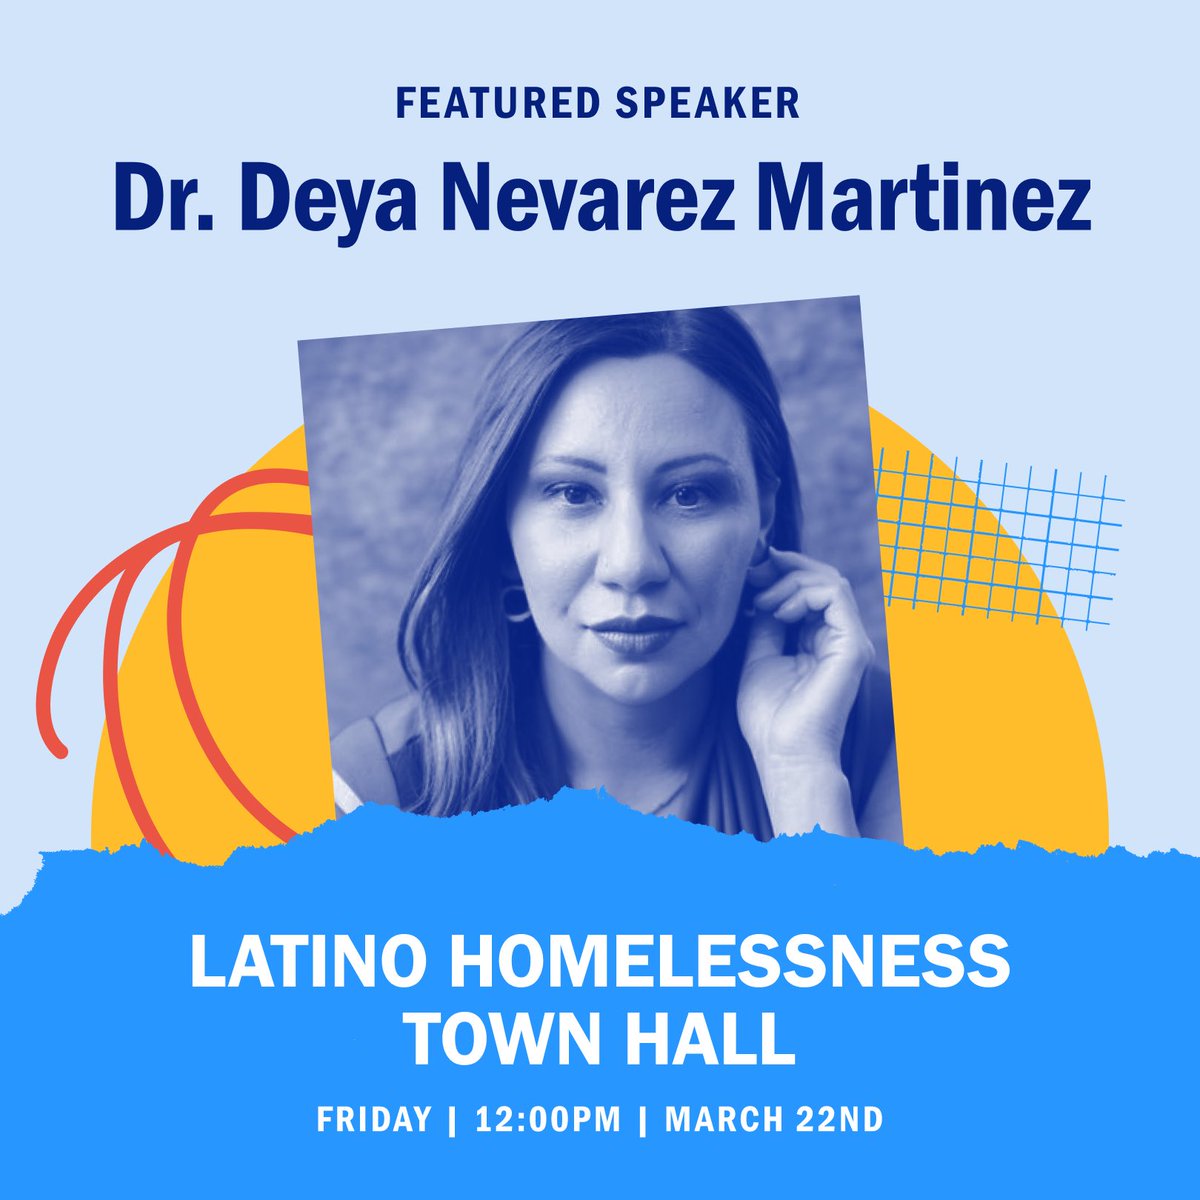 Dr. Deya Nevarez Martinez is an Assistant Professor of Urban and Regional Planning at Michigan State University and an expert when it comes to Latino homelessness in LA County.    We are honored to have her join us for tomorrow’s Town Hall💙   RSVP here: everyoneinla.org/events